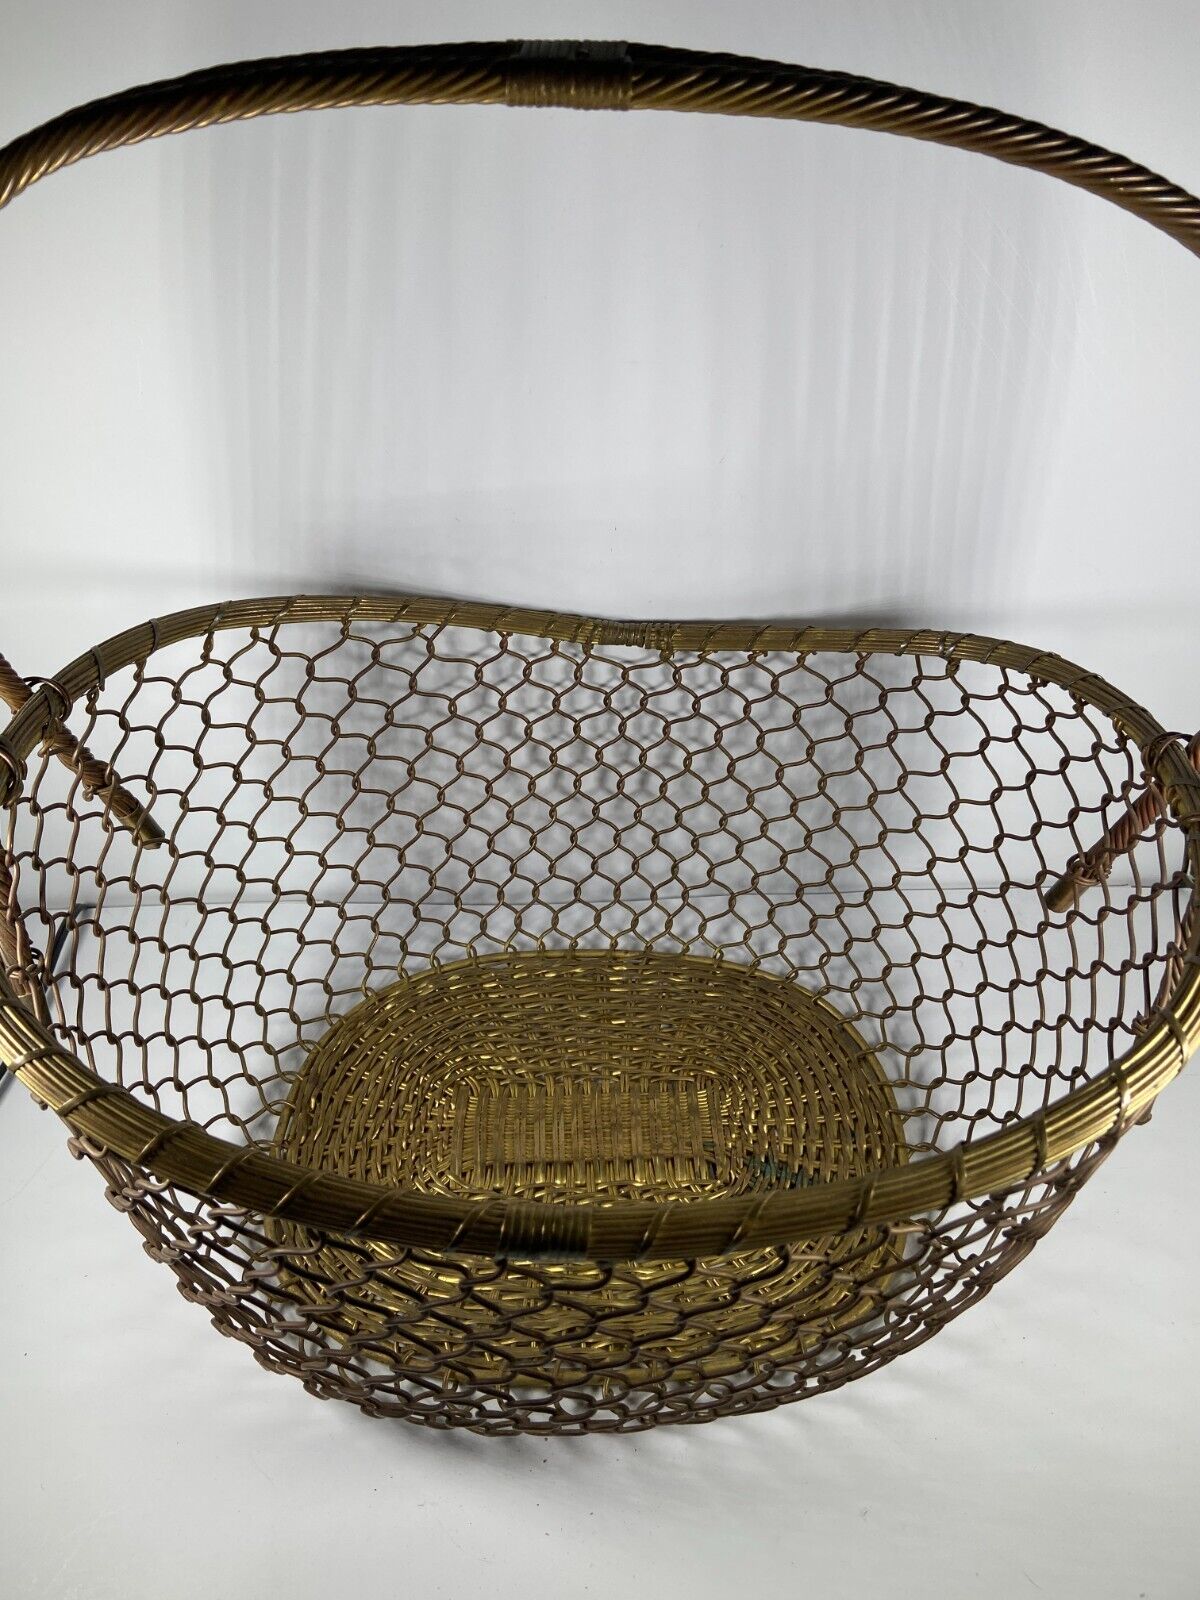 VTG Woven Brass Oval Basket w Handle Handcrafted Decorative Crafts #3402 India